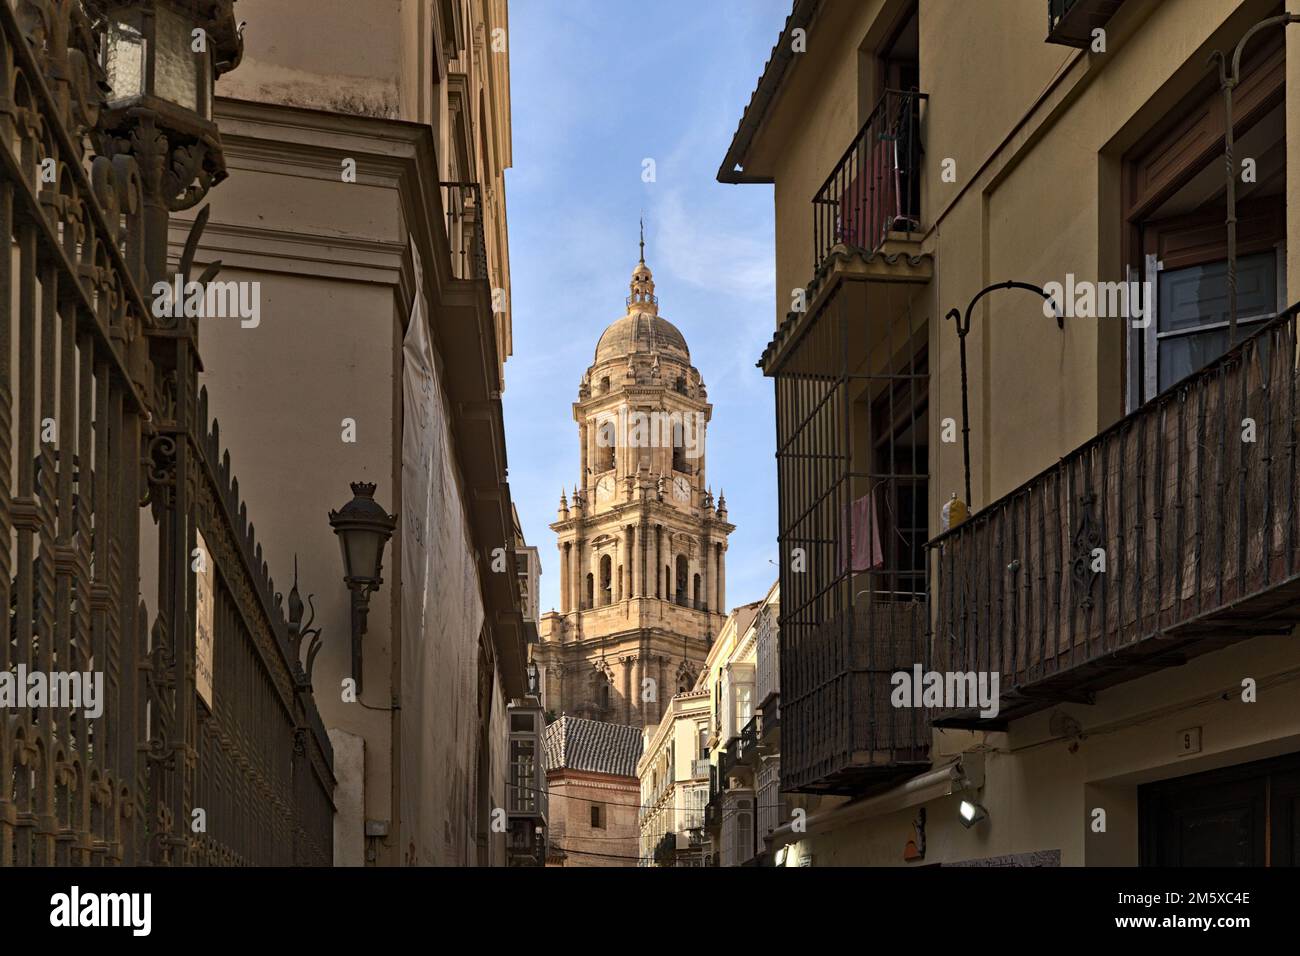 The tower of the Holy Cathedral Church Basilica of the Incarnation, the cathedral of Malaga pictured through a narrow street Stock Photo